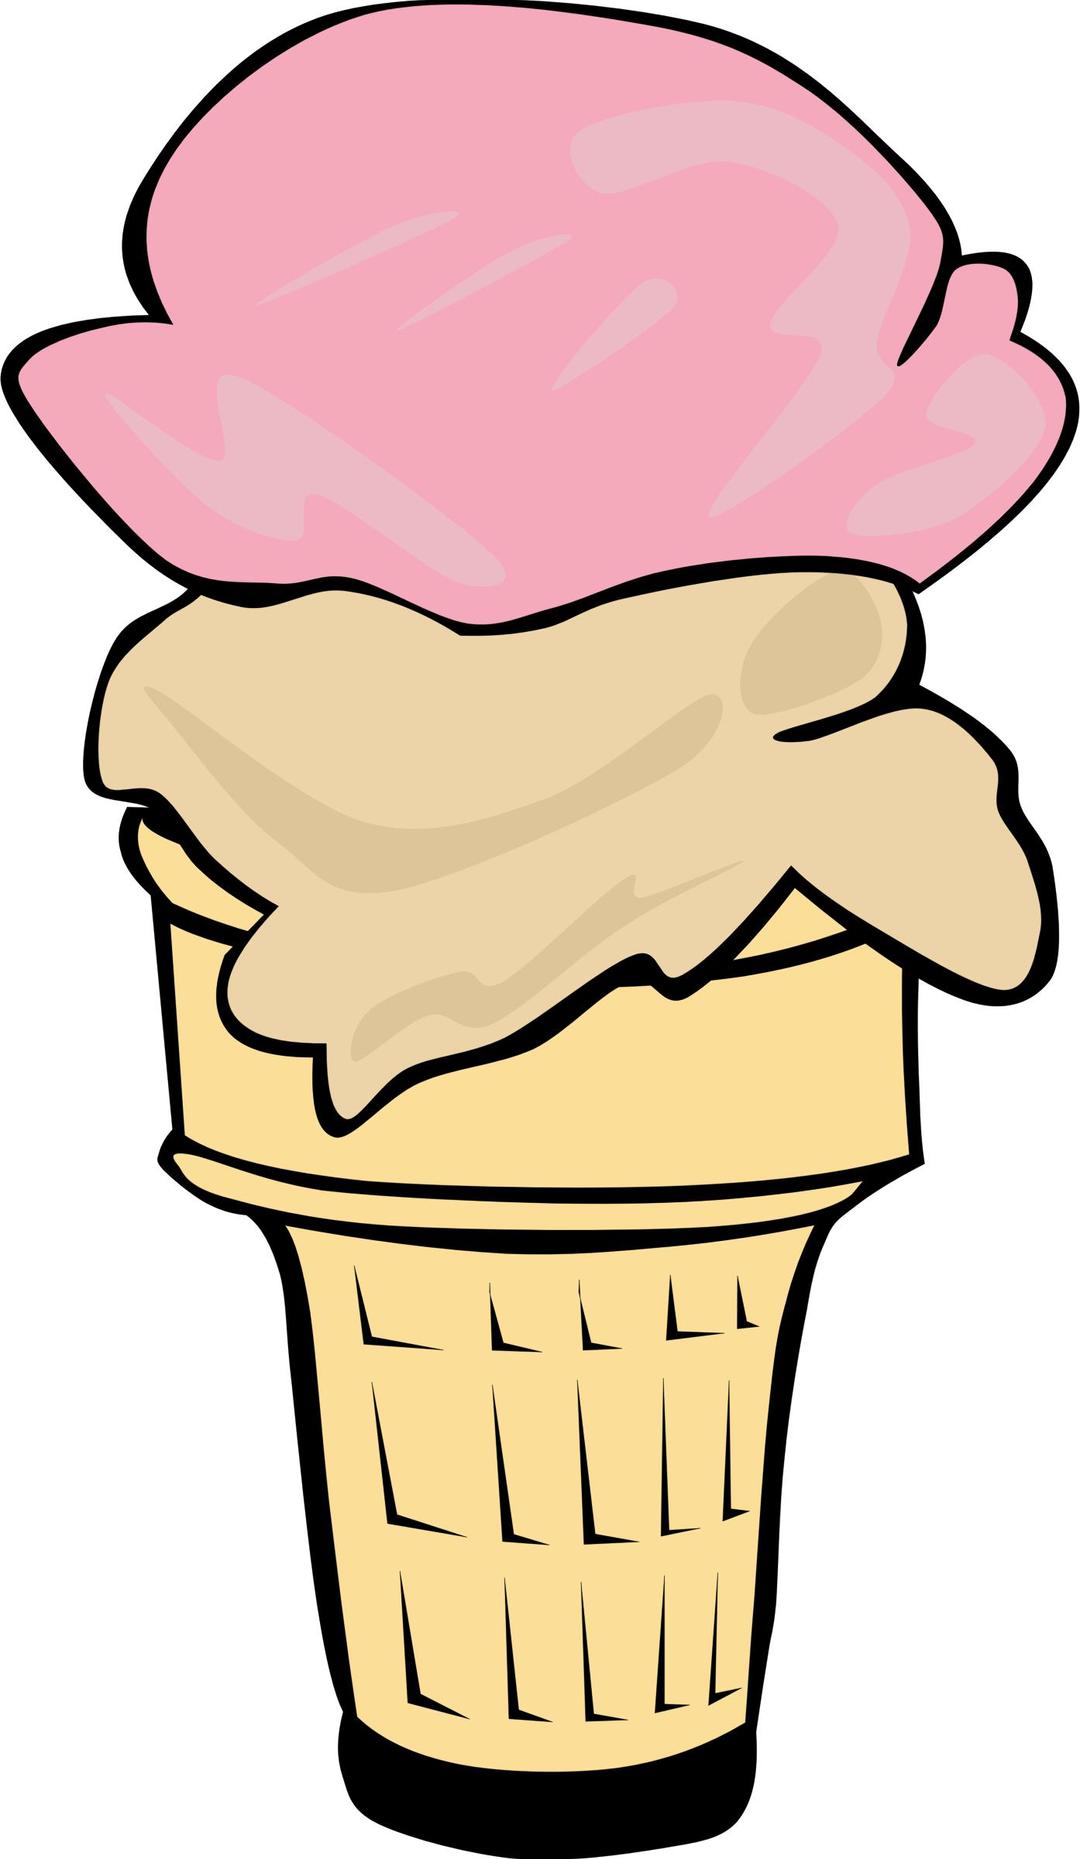 Fast Food, Desserts, Ice Cream Cone, Double png transparent